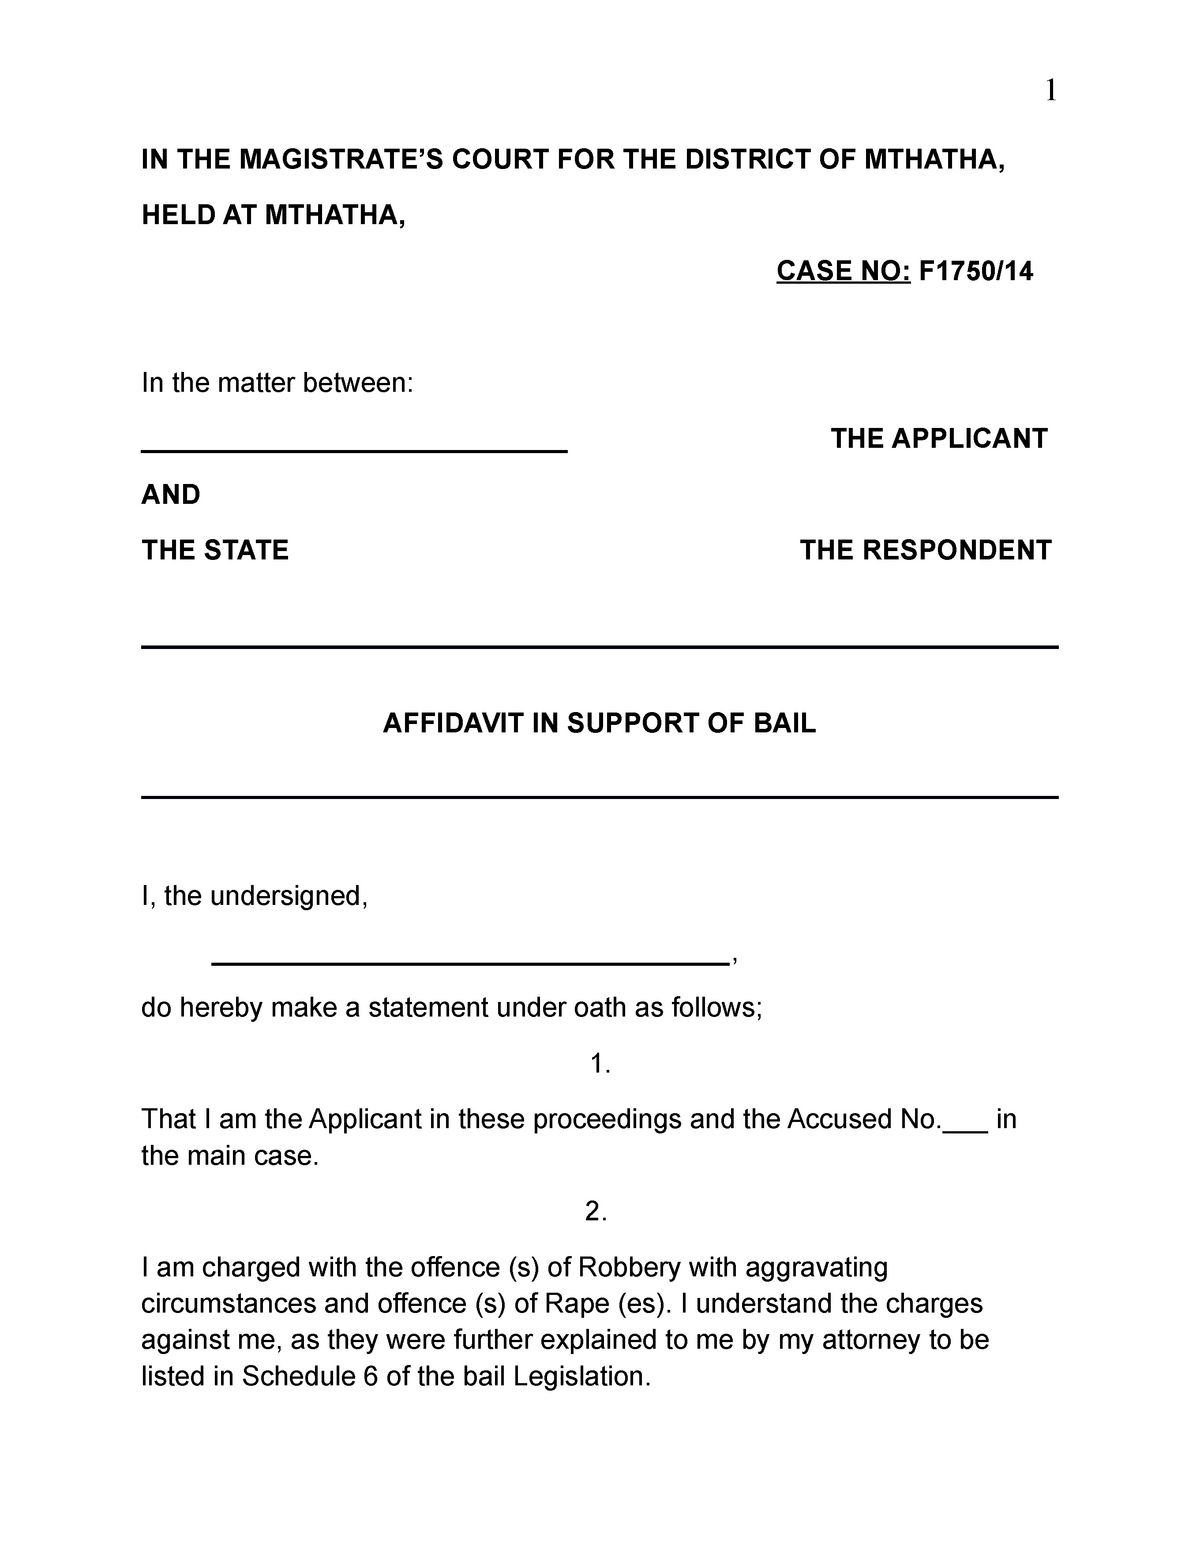 BAIL Affidavit template IN THE MAGISTRATE S COURT FOR THE DISTRICT OF